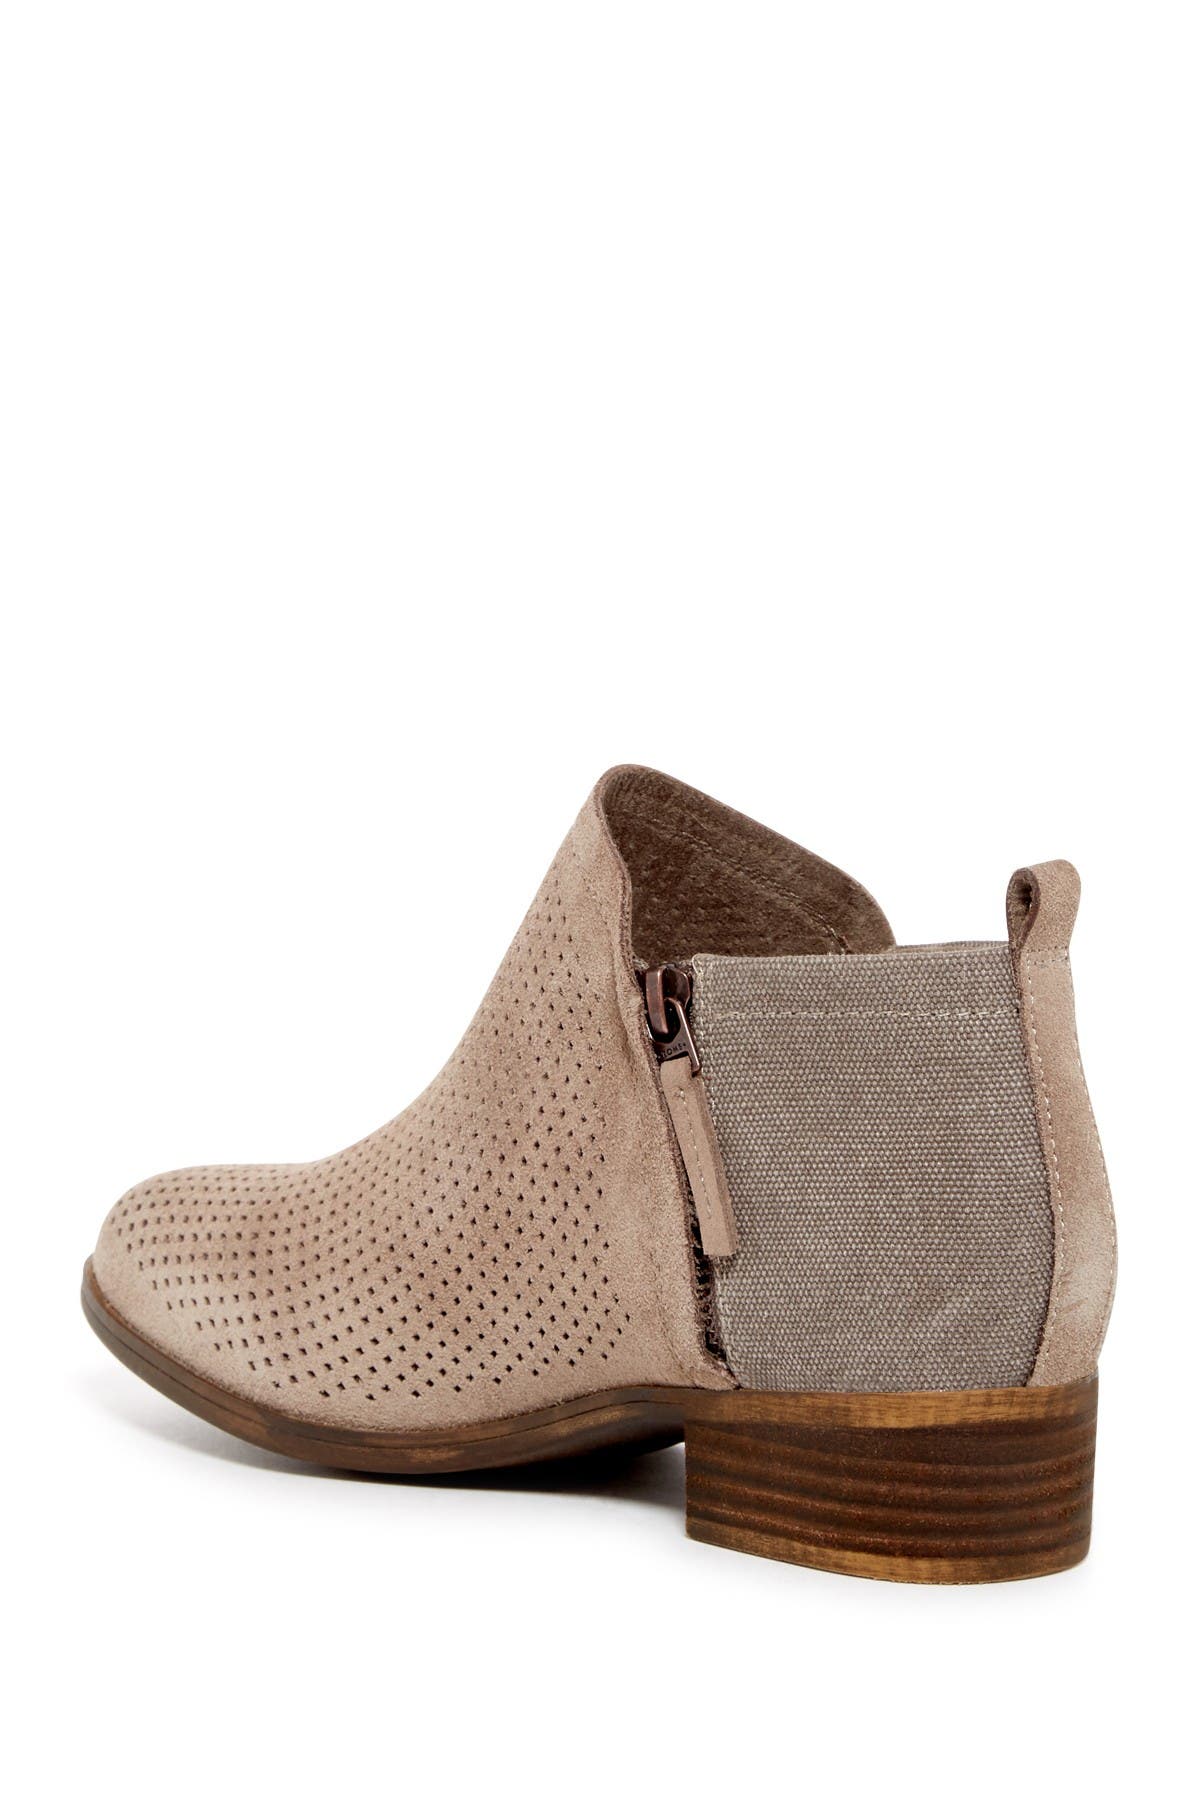 TOMS | Deia Perforated Suede Boot 